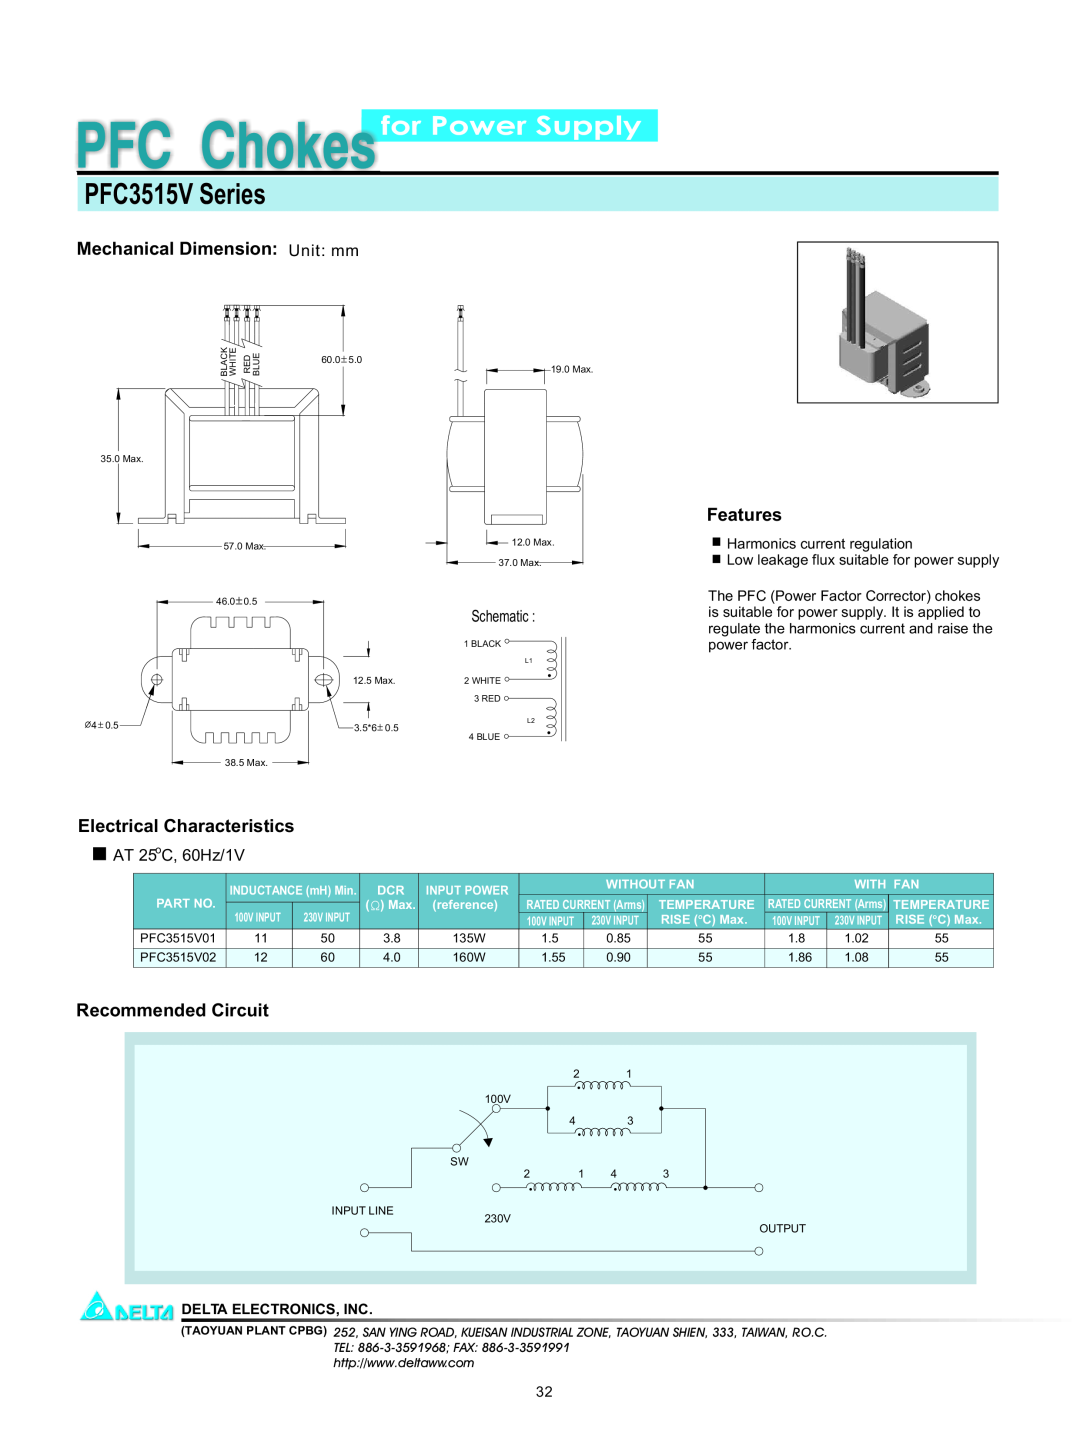 Delta Electronics PFC3515V Series manual for Power Supply, Mechanical Dimension Unit mm, Features, Recommended Circuit 